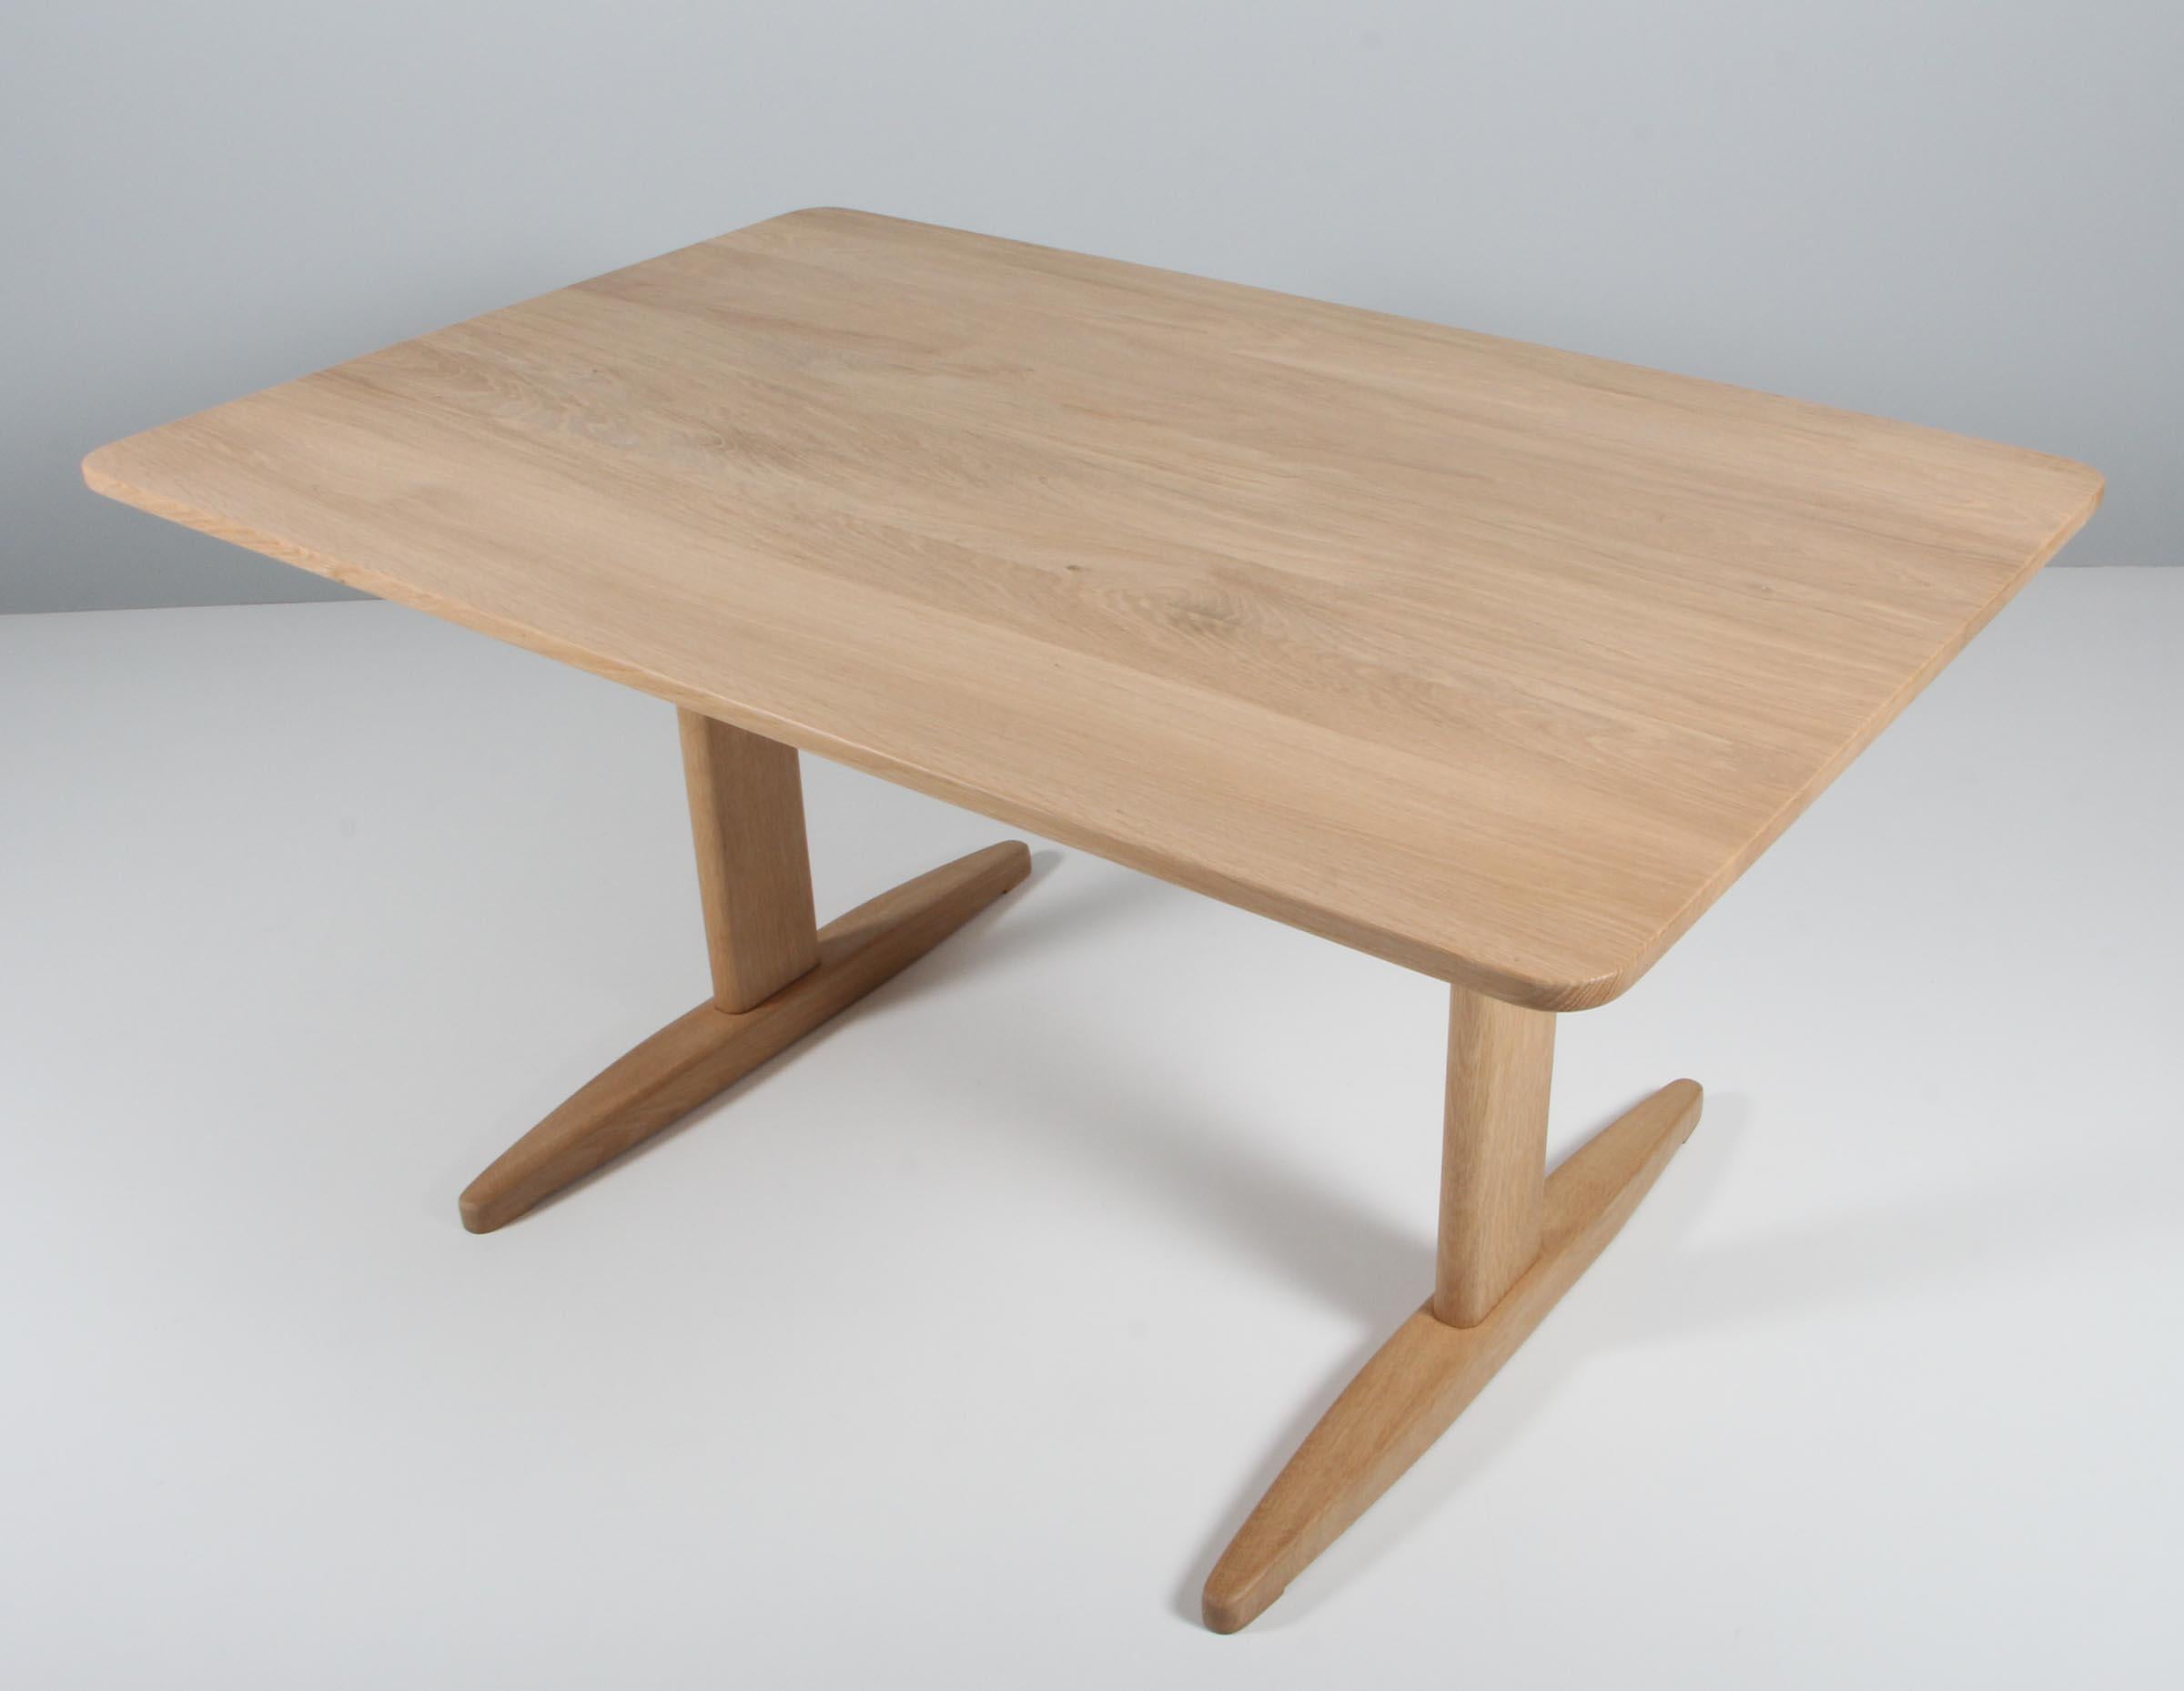 Børge Mogensen shaker dining table in solid soap treated oak. 

Made by C.M. Madsen, model 1181.